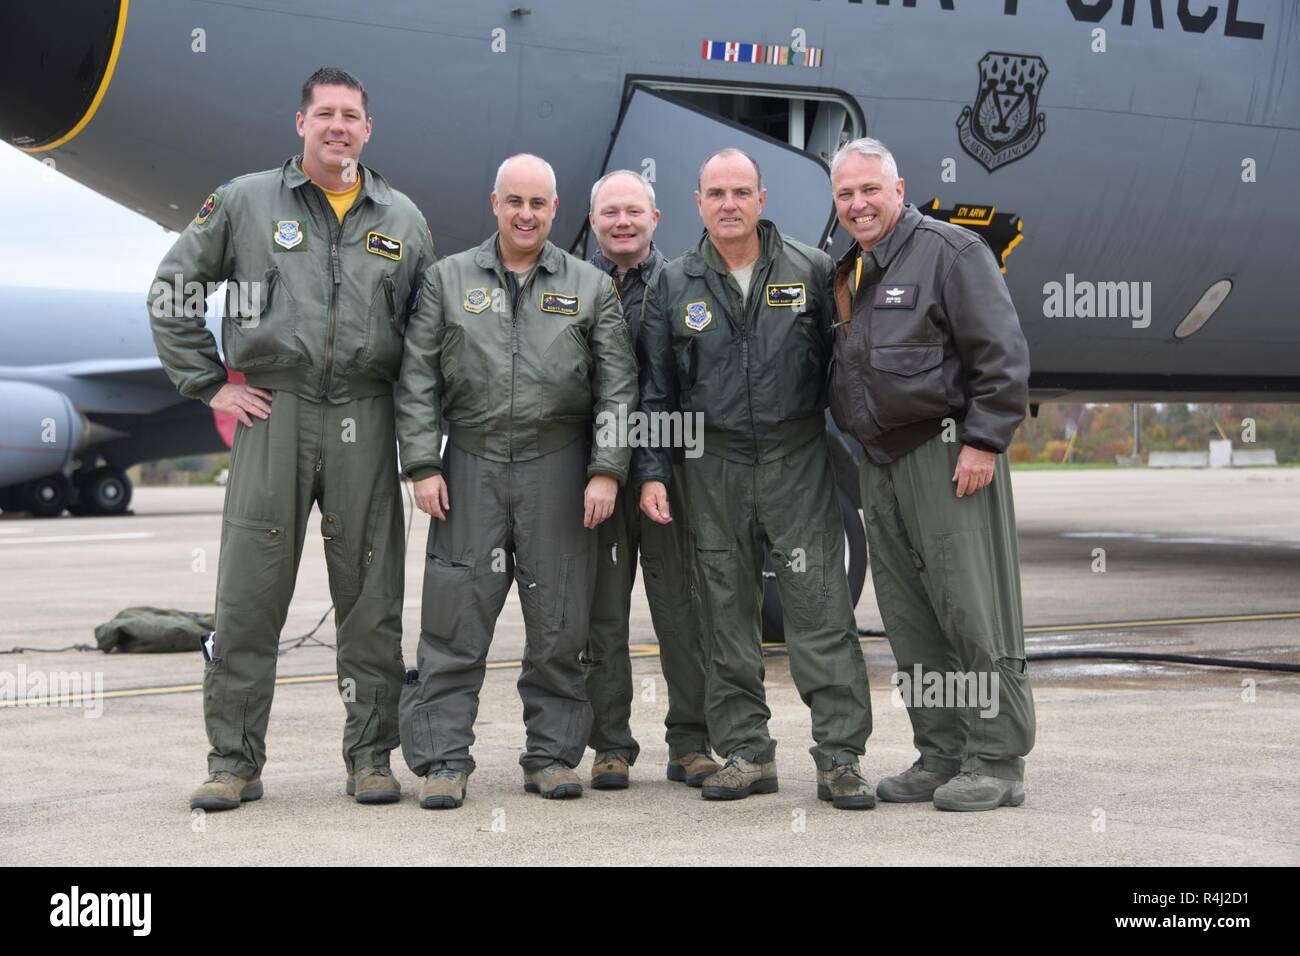 Pennsylvania Air National Guardsman Command Chief Master Sgt. Randy Miller (second from right) poses with the crew he flew with during his final flight Oct. 26, 2018. He celebrates 39 years of service and retires as the Command Chief Master Sgt. at the 171st Air Refueling Wing where he held that job title since 2011. Chief Miller has over 4300 flight hours. He started his career in the active duty Air Force in 1977 where he served in logistics and postal And in 1983 transferred to the Texas Air National Guard. He took to the sky in 1993 where he trained into the in-flight refueling career fiel Stock Photo